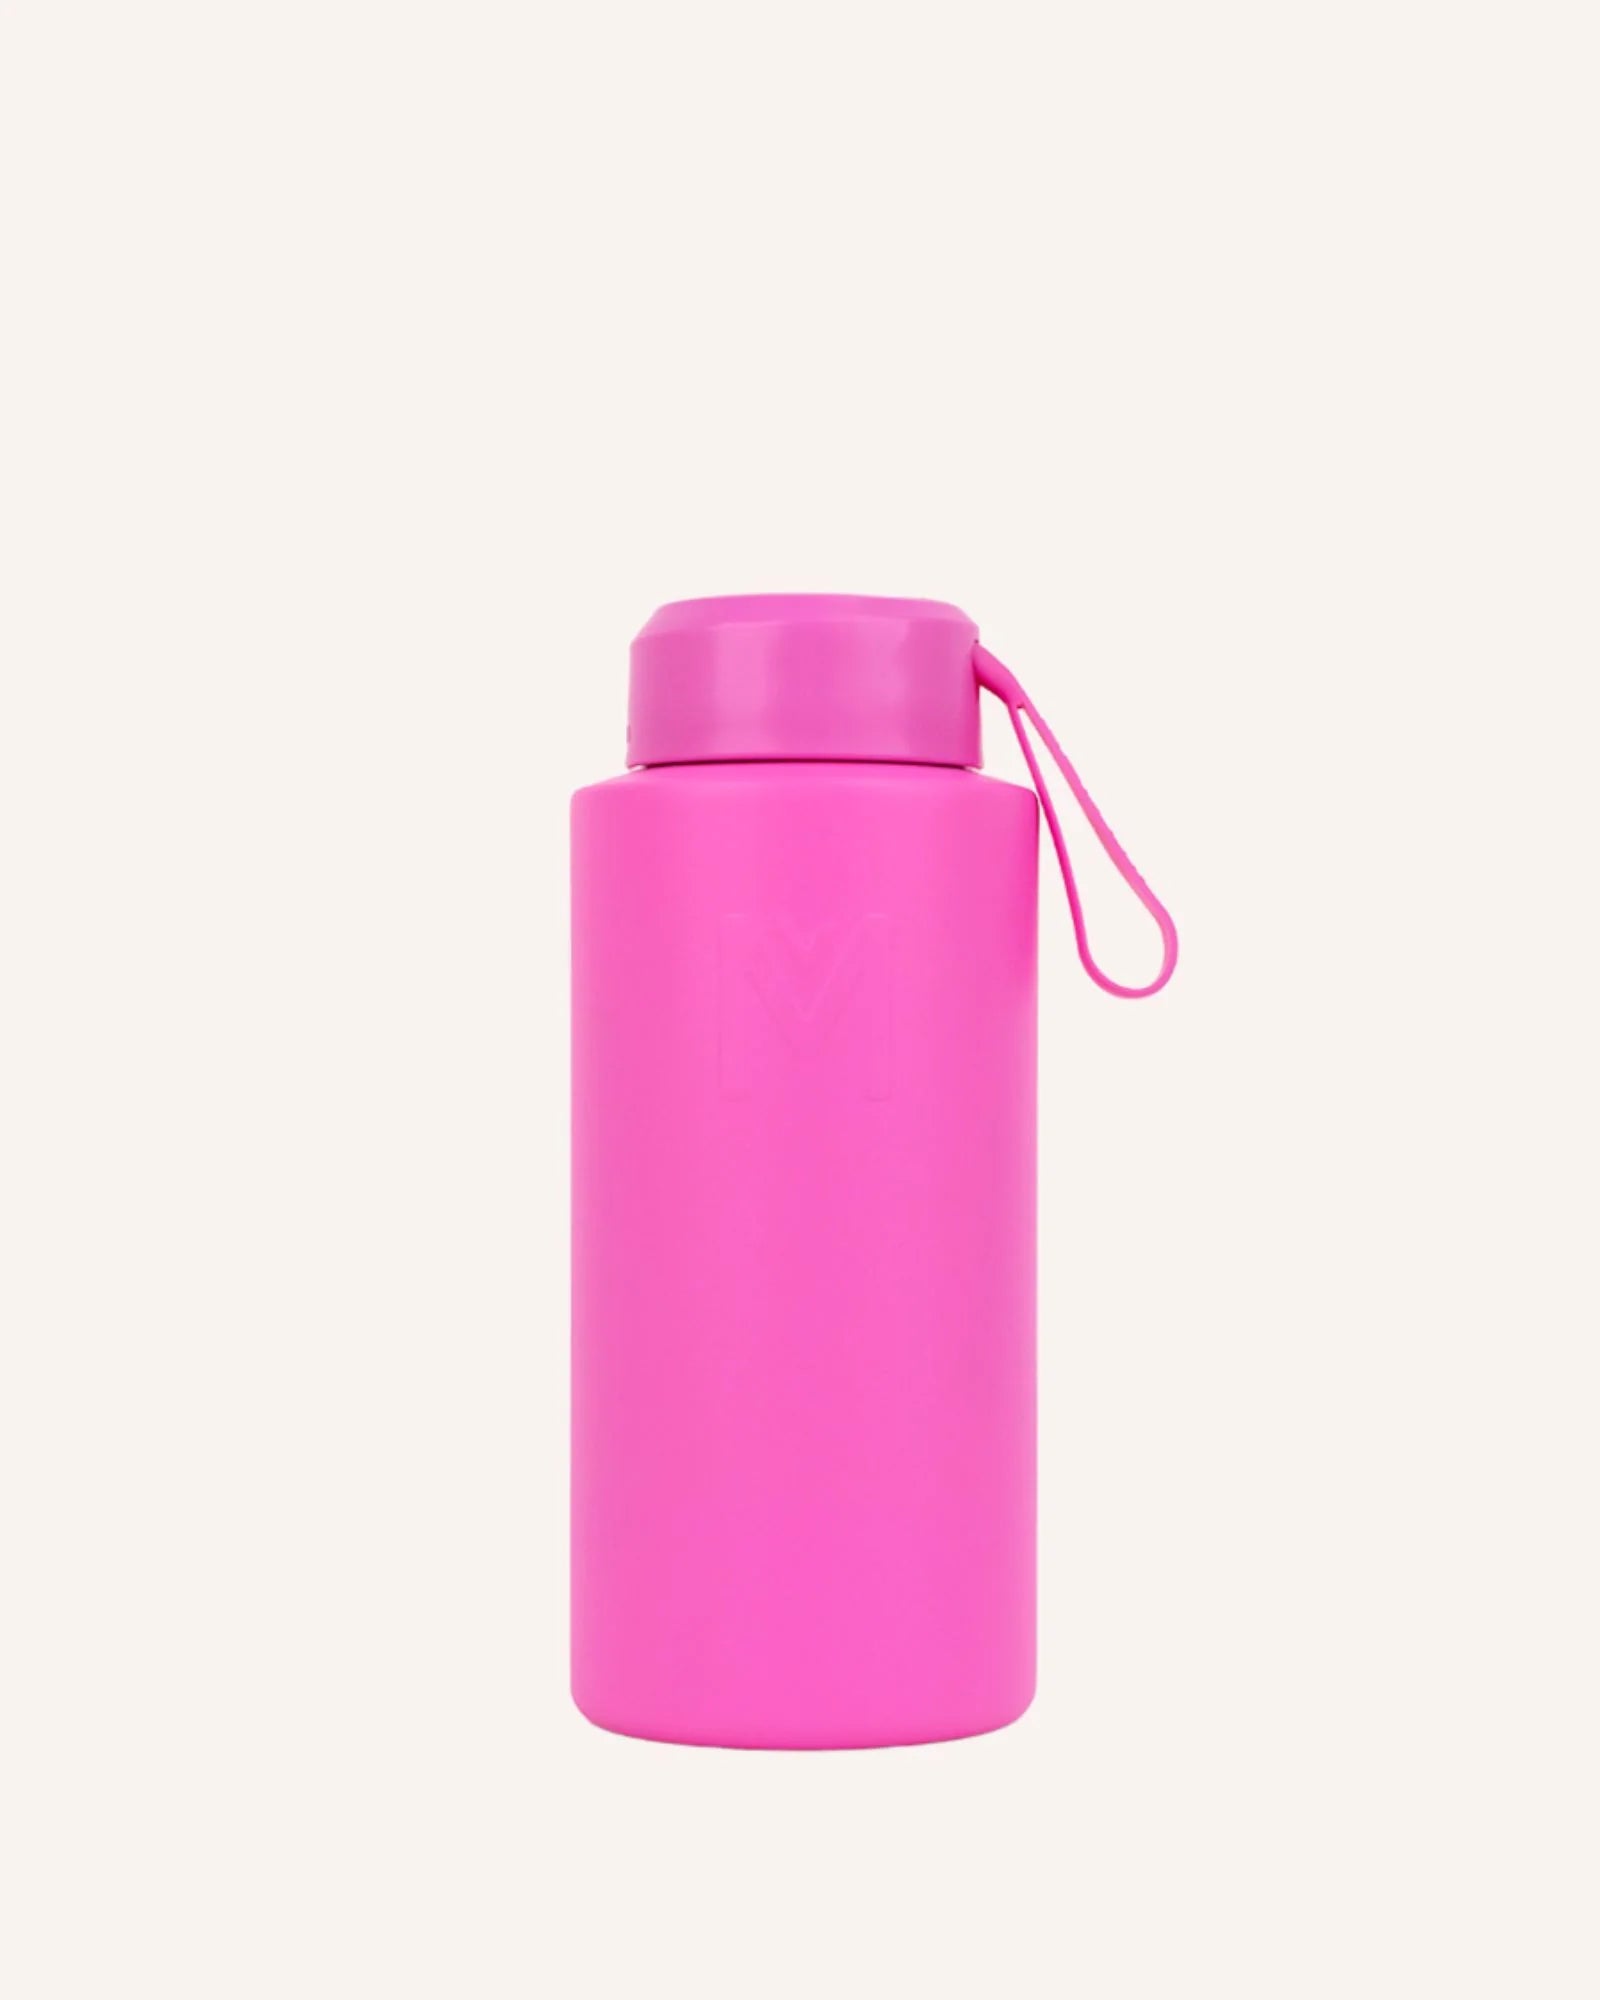 MontiiCo 1L Insulated Flask Bottle - Calypso